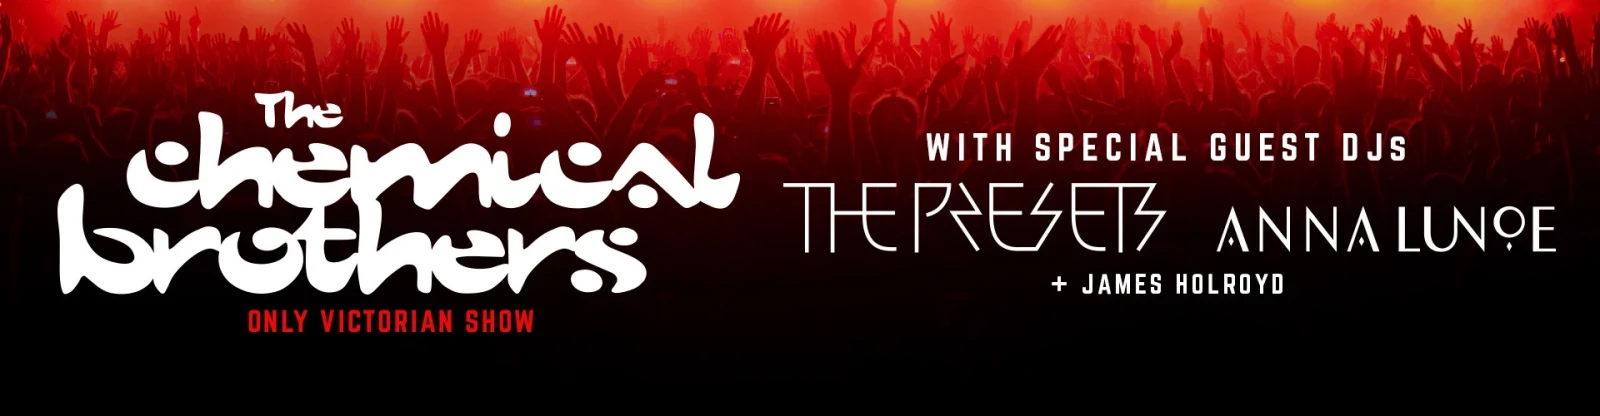 The Chemical Brothers Australian Tour with The Presets and Anna Lunoe :  r/triplej